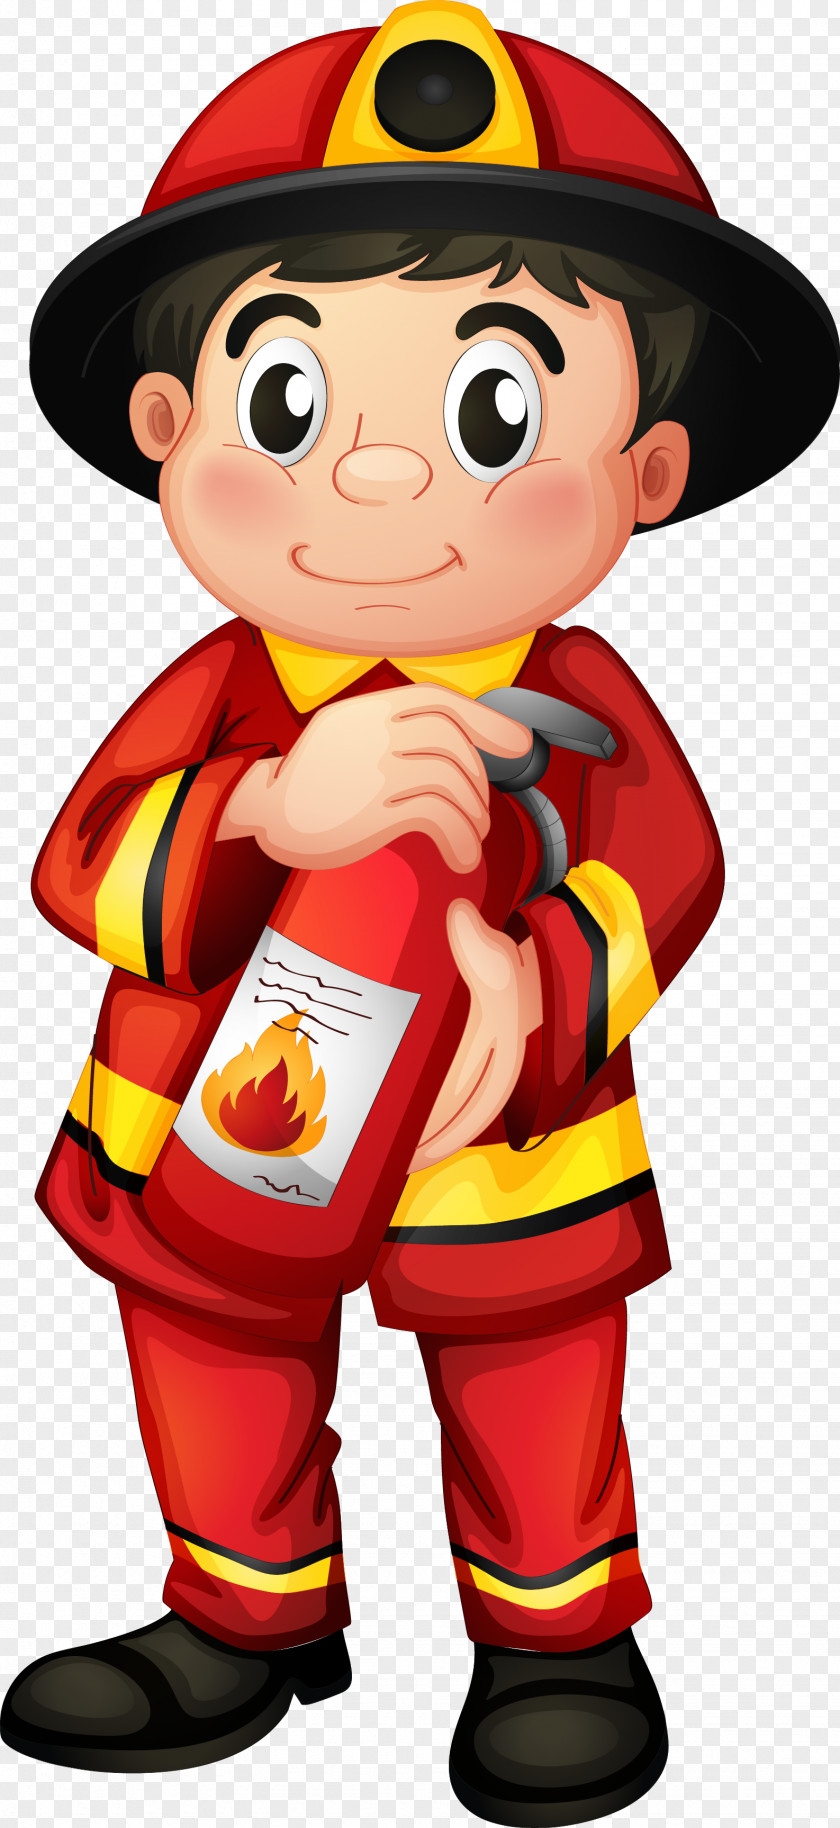 Firefighter Fire Department Station Engine Clip Art PNG